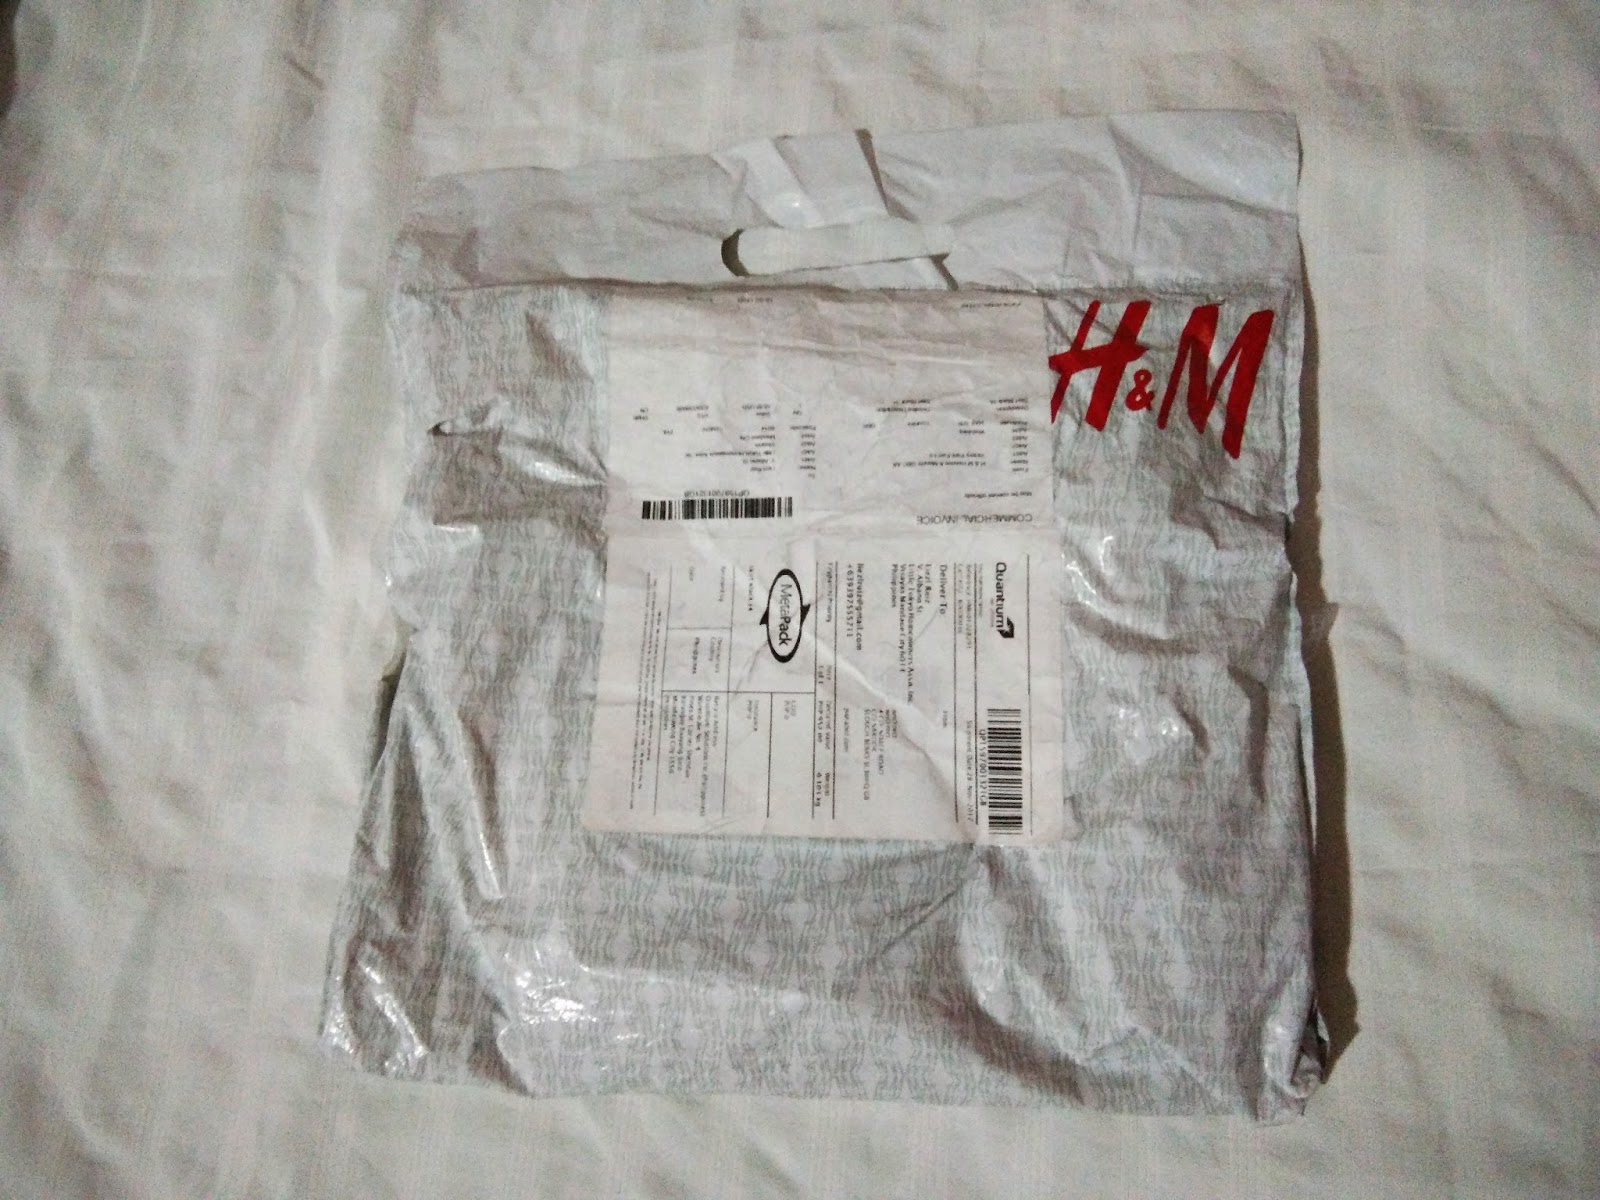 H&M Online shipping to the Philippines